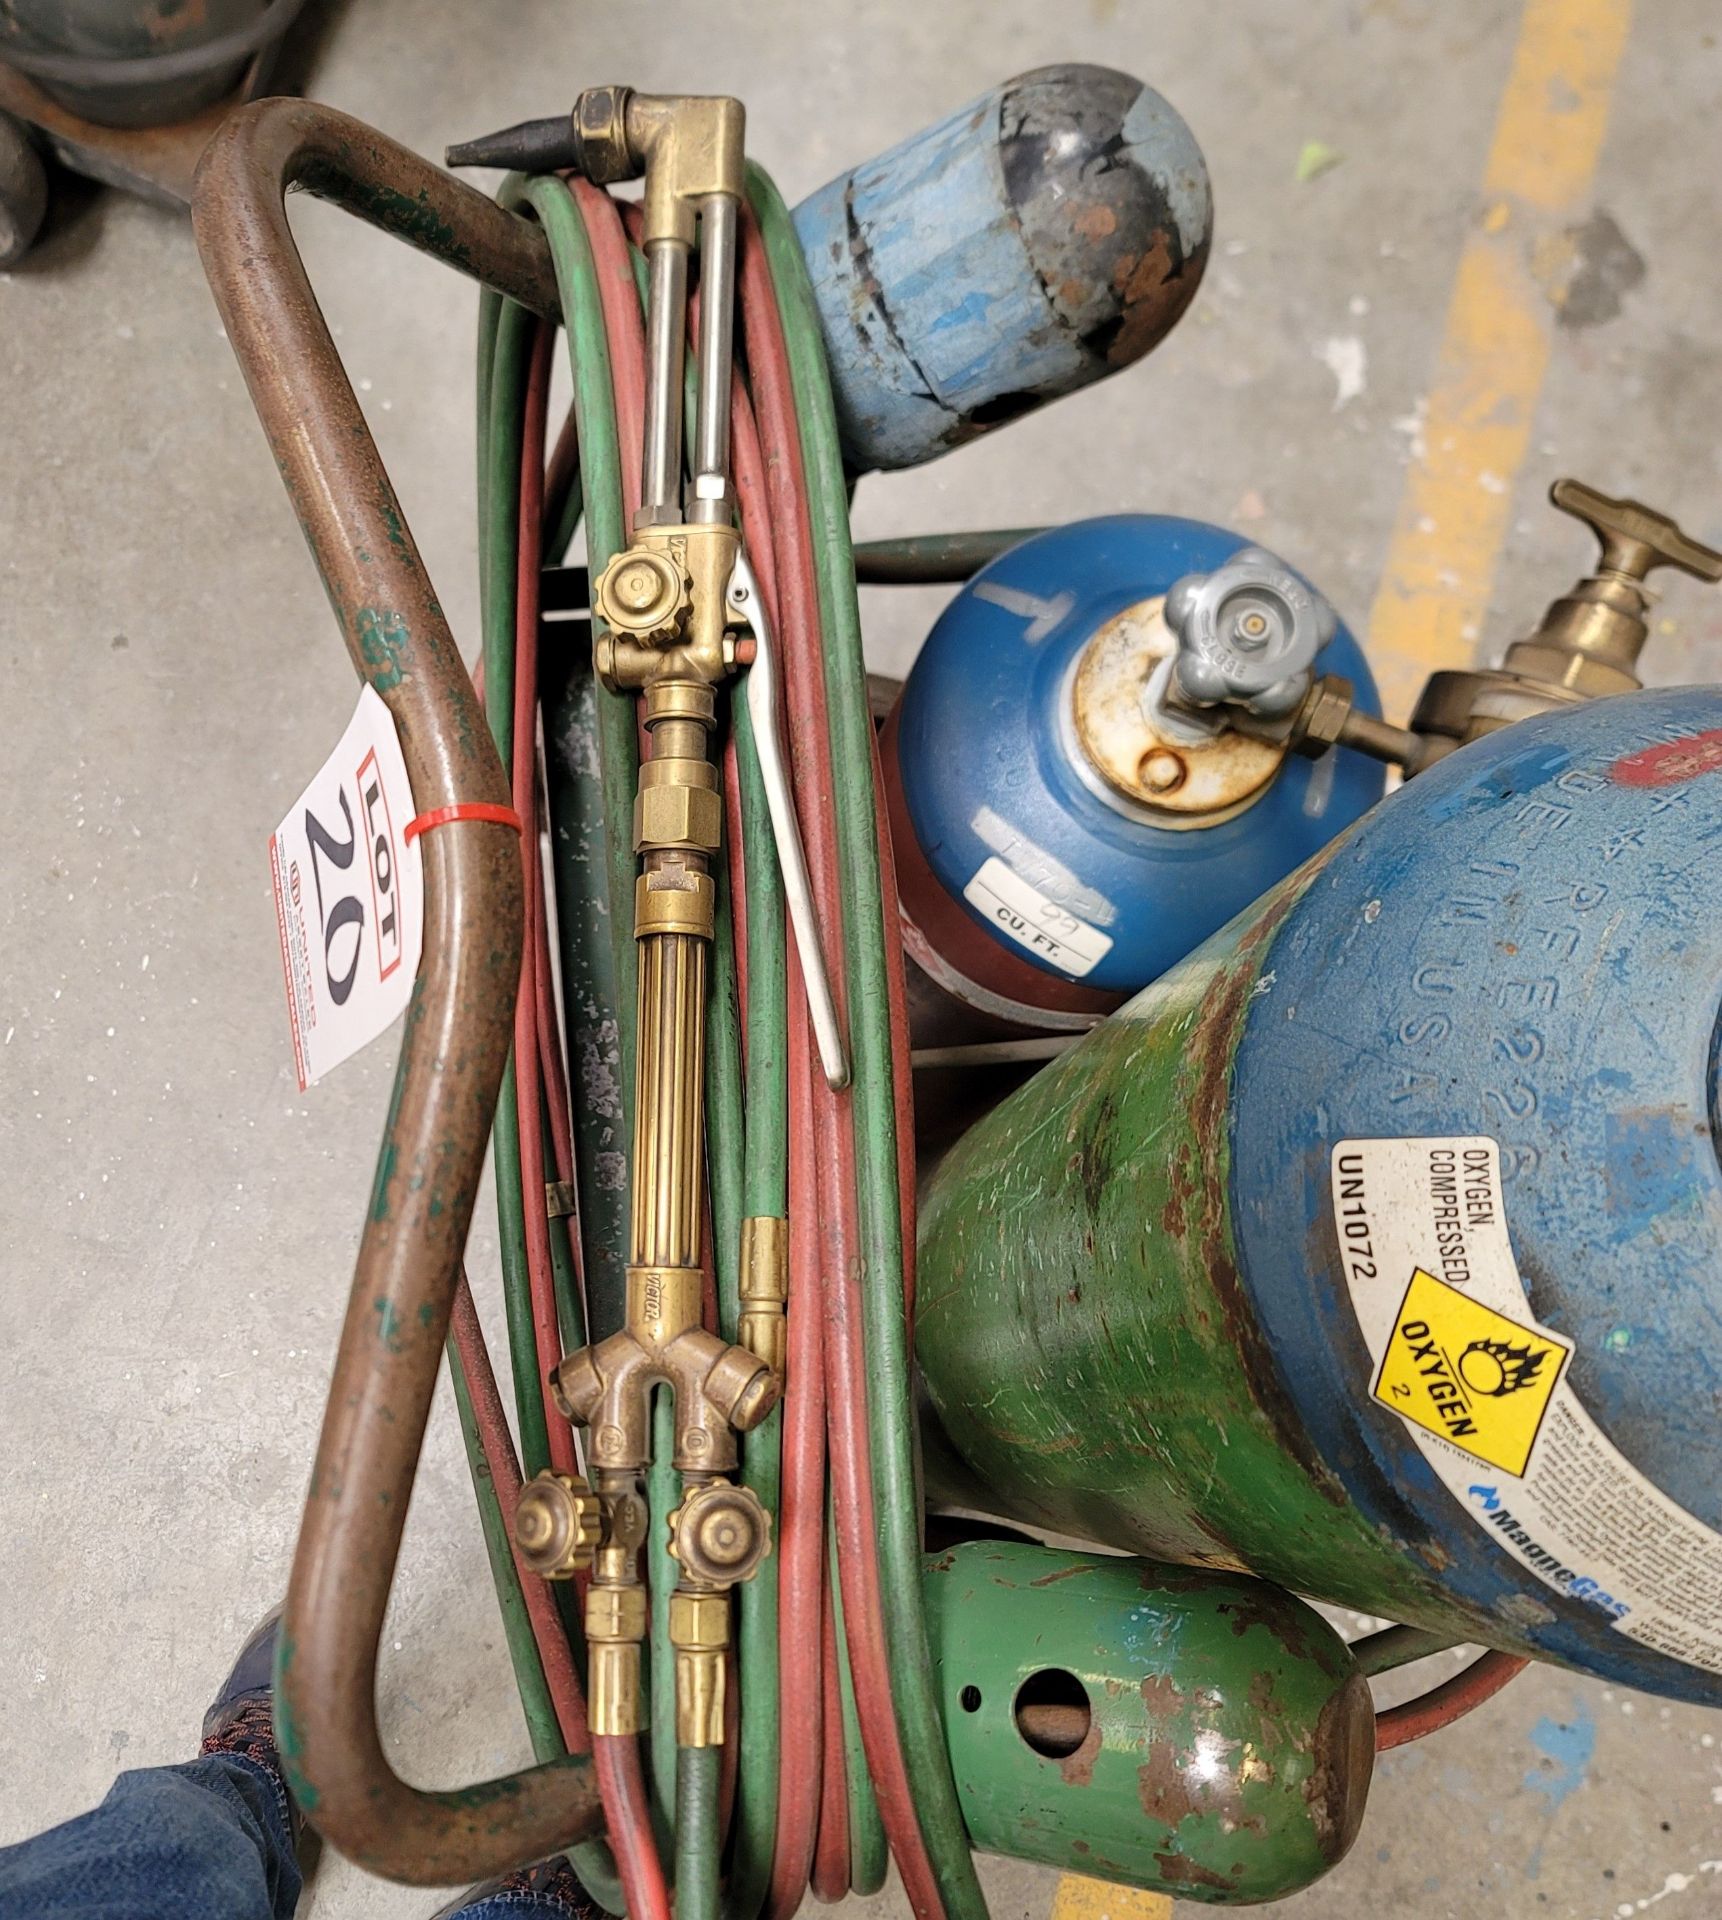 OXY-ACETYLENE CART W/ VICTOR CUTTING TORCH, HOSES, REGULATORS, GAS CYLINDERS NOT INCLUDED - Image 4 of 4